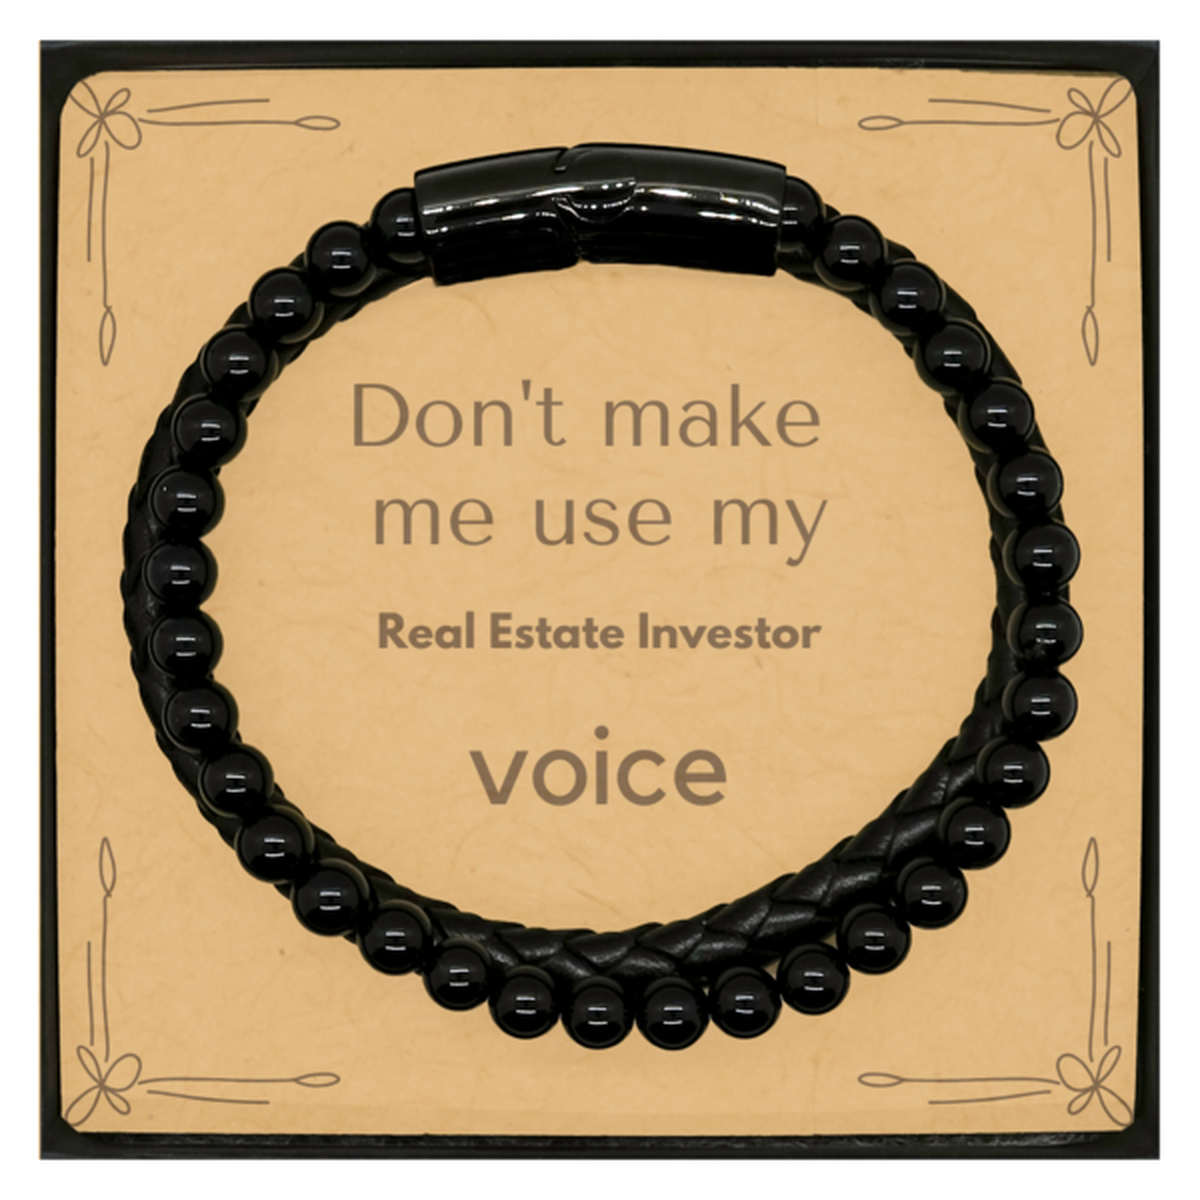 Don't make me use my Real Estate Investor voice, Sarcasm Real Estate Investor Card Gifts, Christmas Real Estate Investor Stone Leather Bracelets Birthday Unique Gifts For Real Estate Investor Coworkers, Men, Women, Colleague, Friends